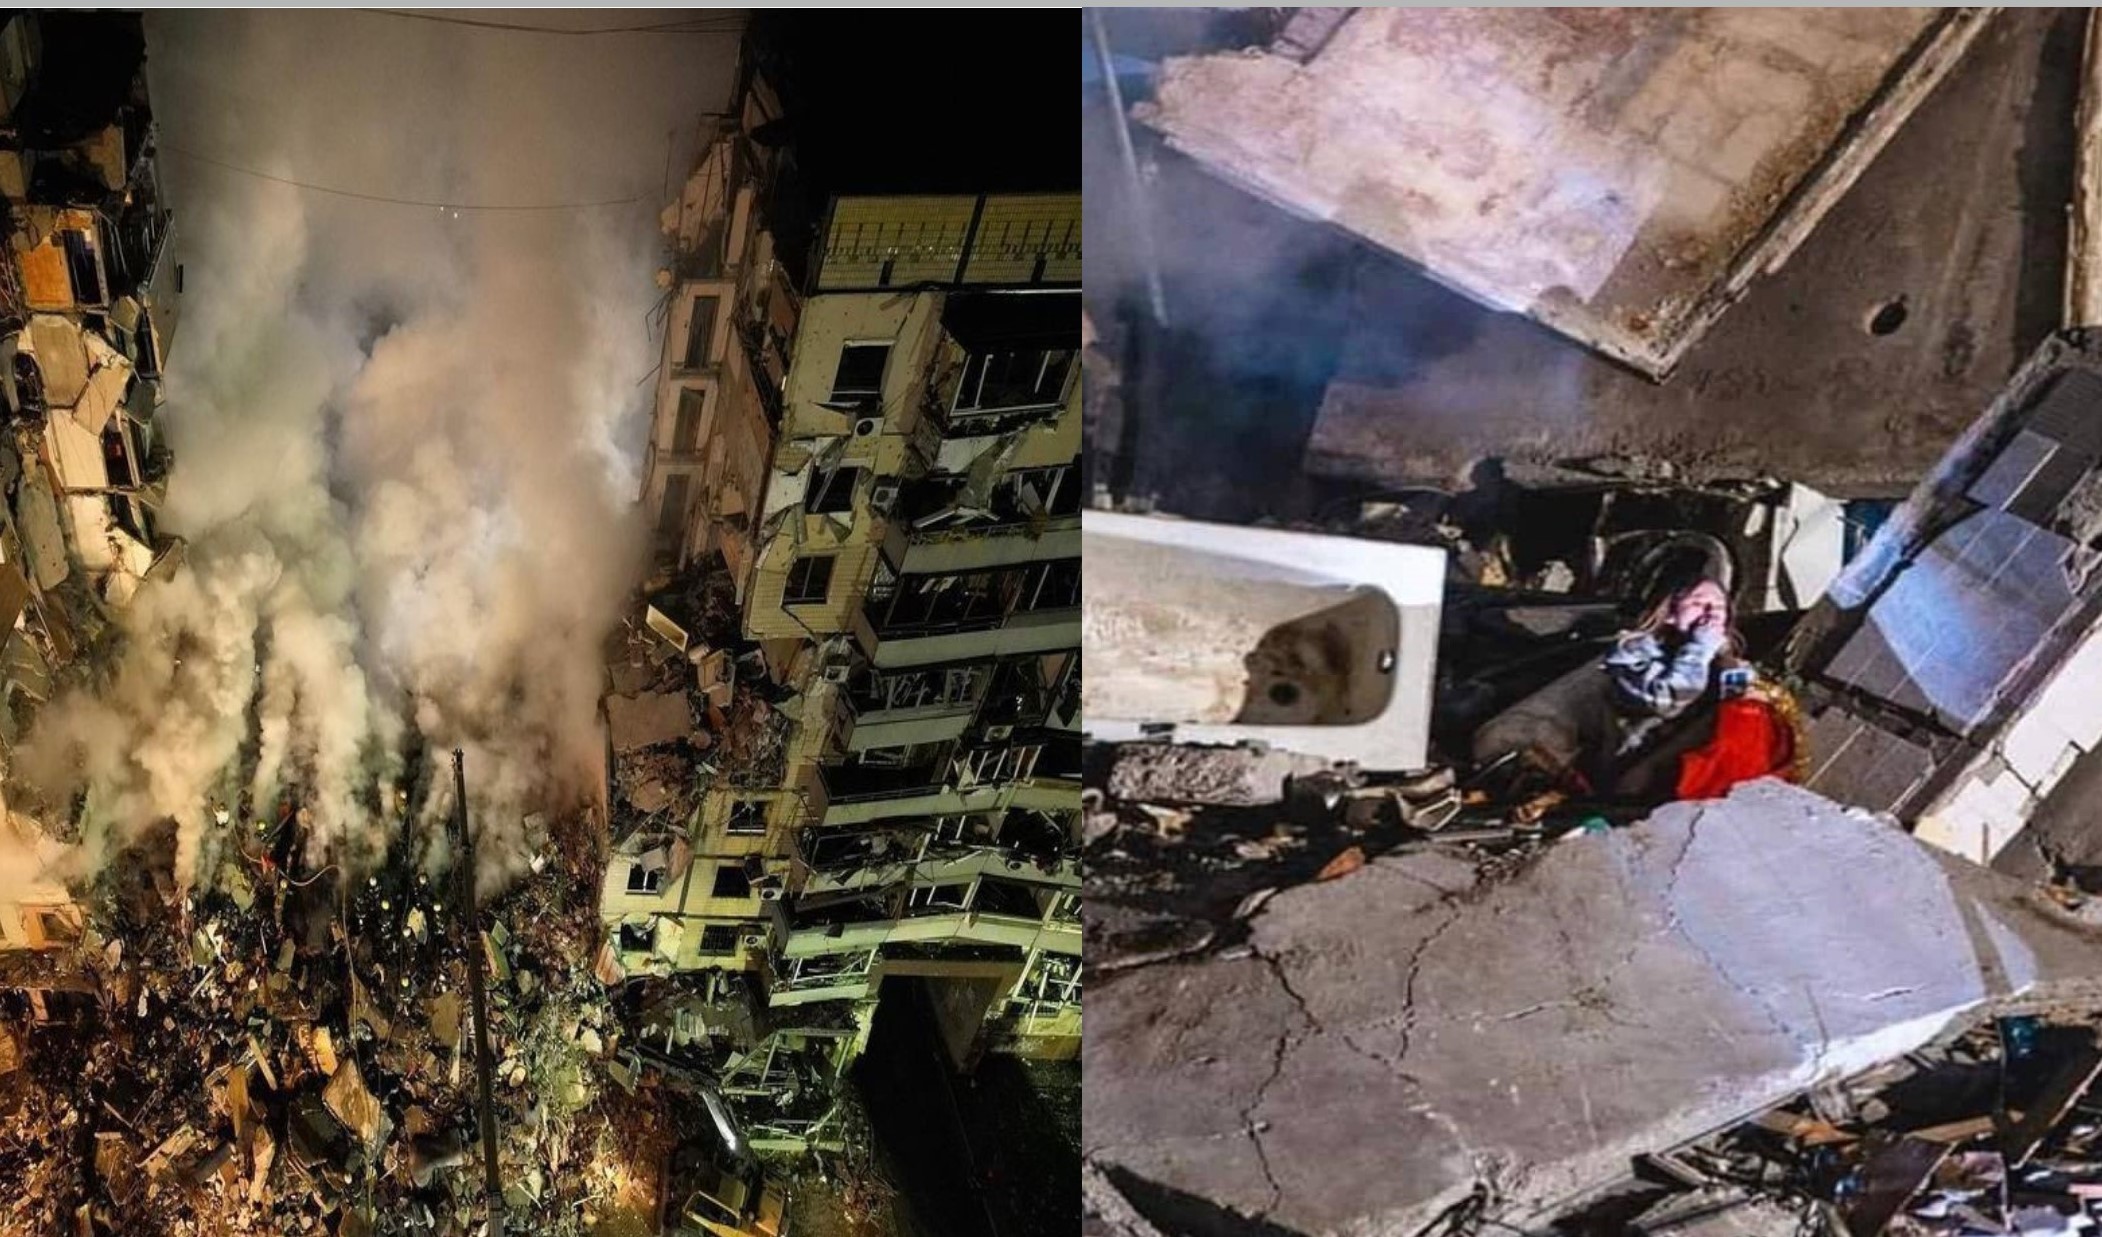 Dnipro The ruins of the tower block Russian bombed and destroyed on 14 January 2023 Photo DNS, Young woman, whose partner was recently killed defending Ukraine, and whose parents were buried under the rubble, awaits rescue Photo Hromadskeended between floors of the bombed block Photo Hromadske